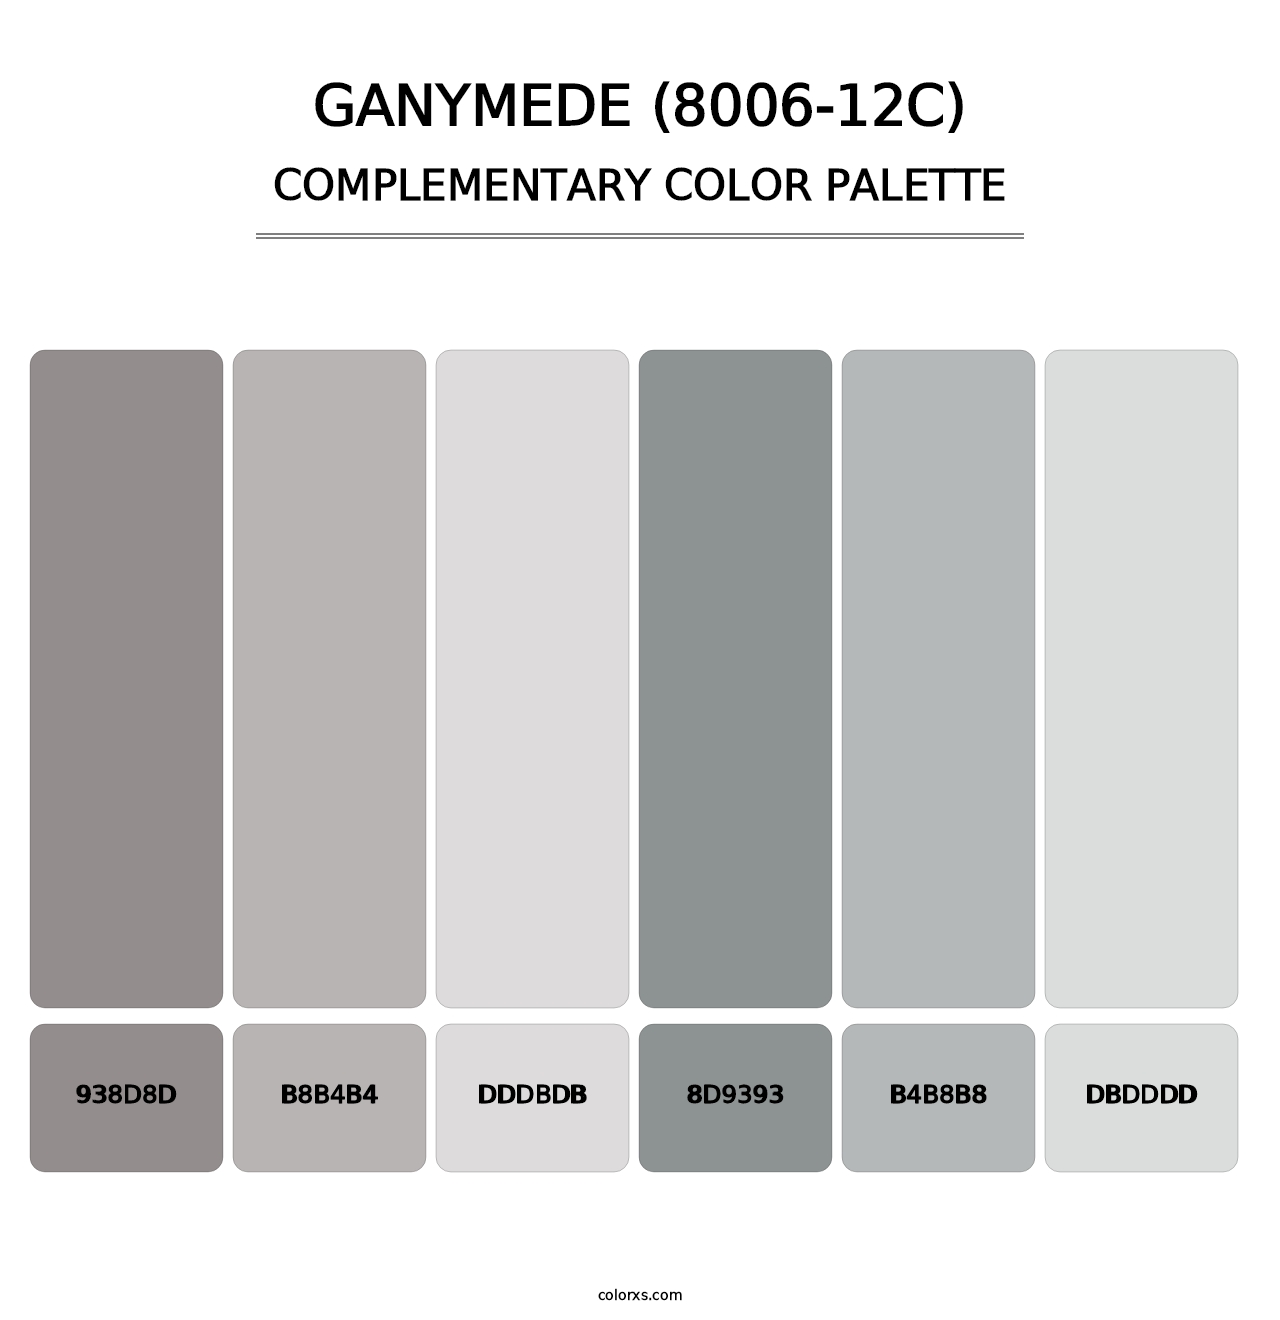 Ganymede (8006-12C) - Complementary Color Palette